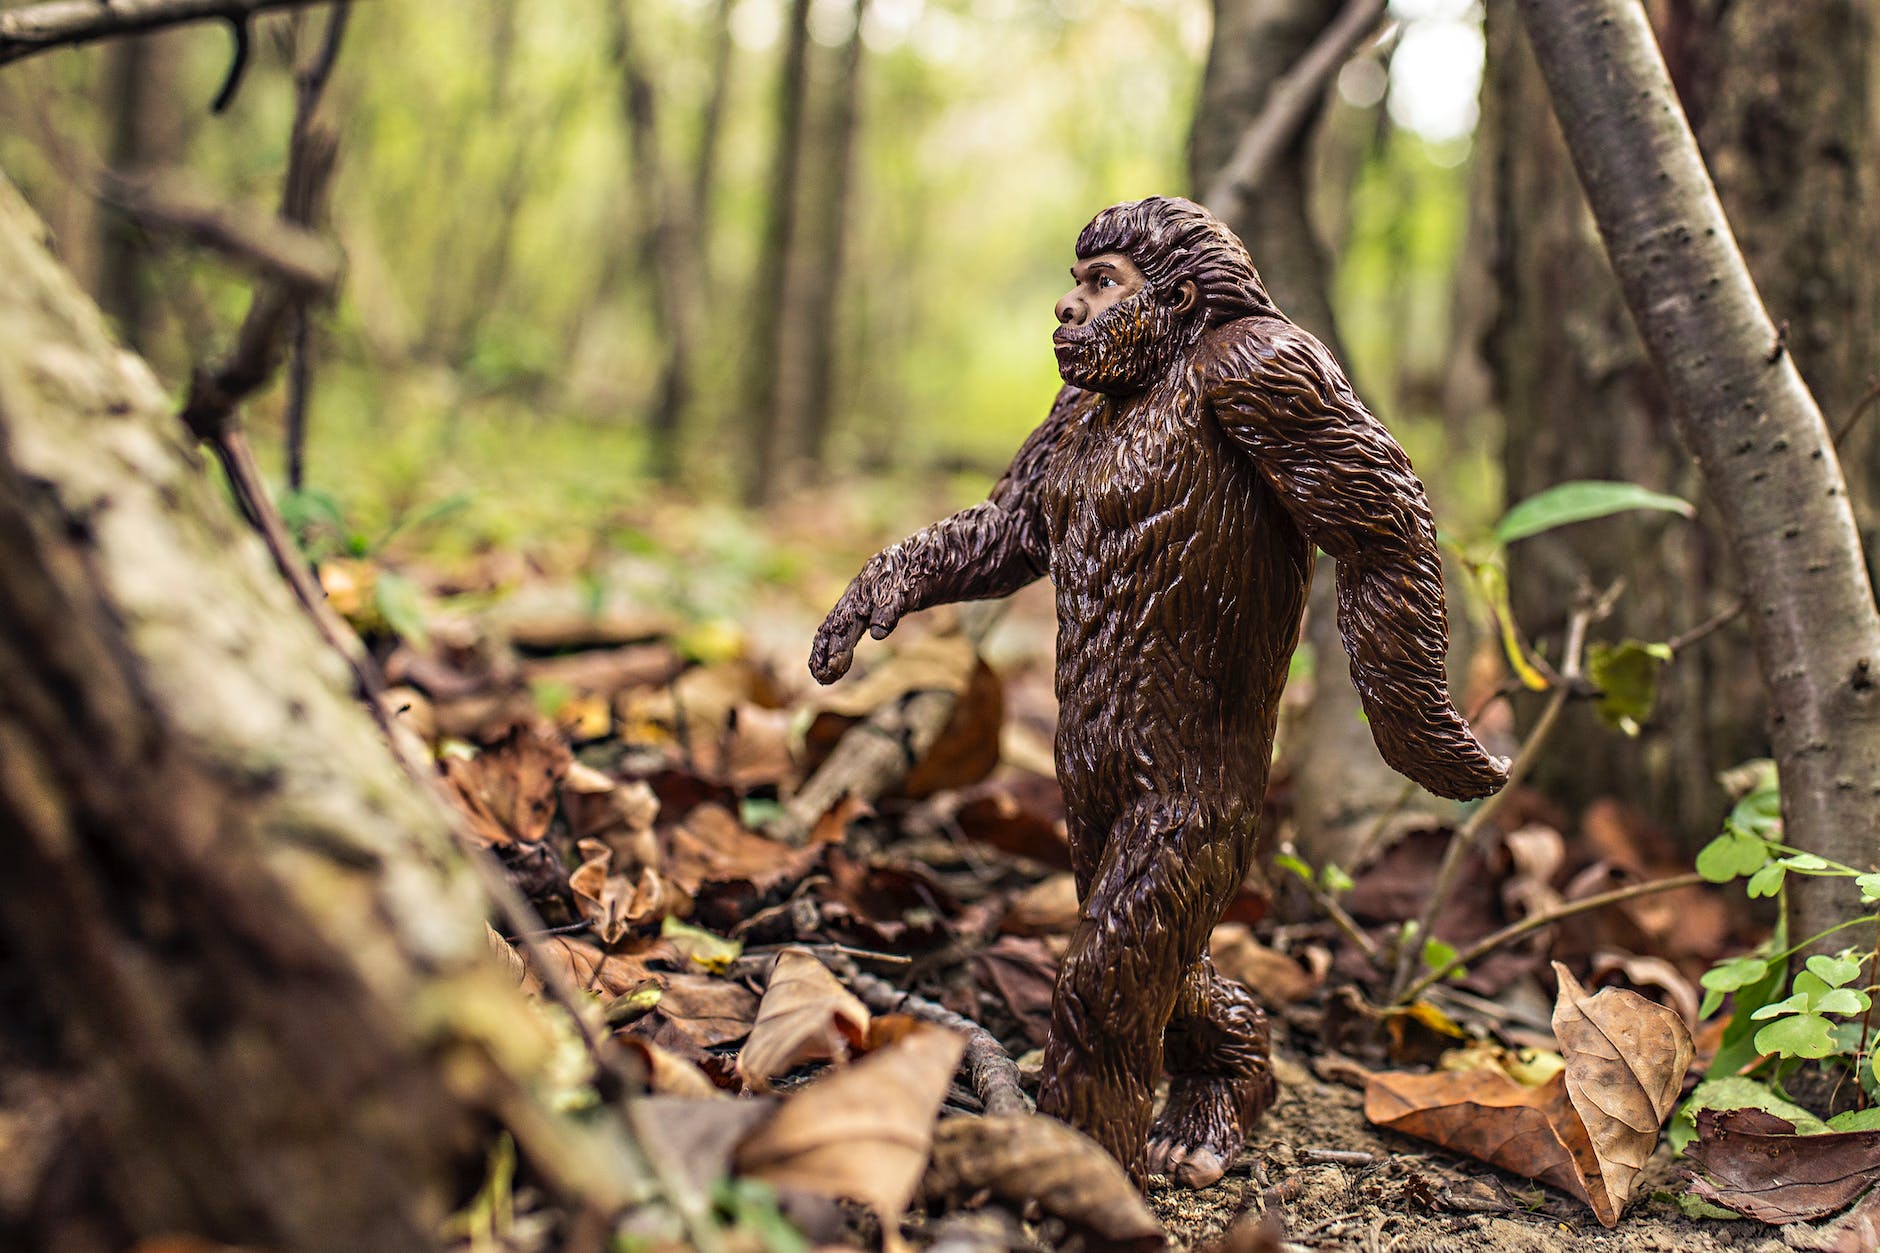 British Bigfoot Sightings and the Folklore Connection